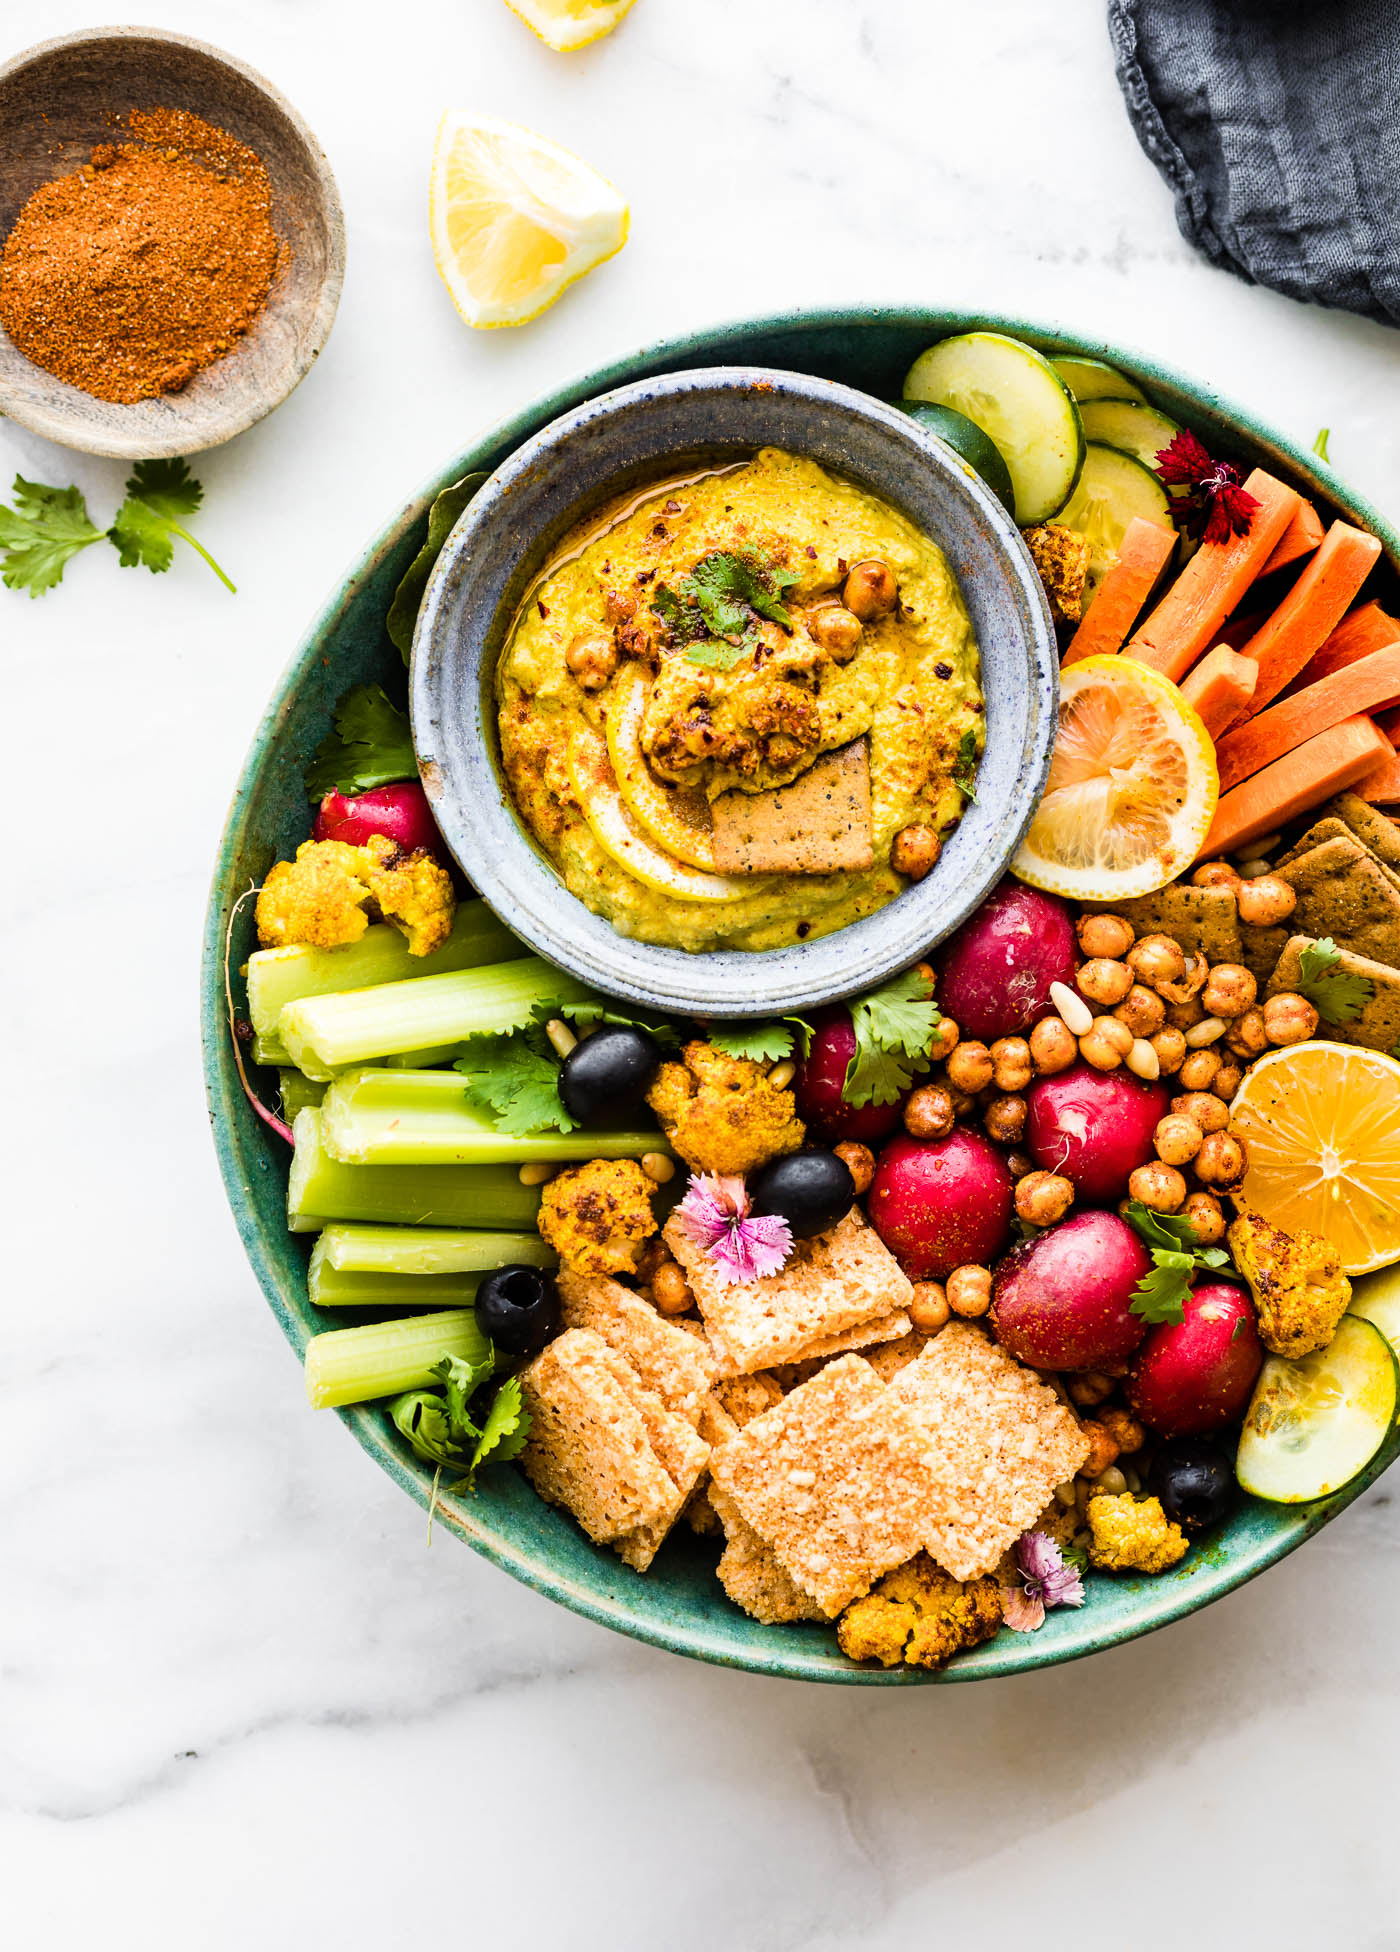 Tandoori Roasted Cauliflower dip in gray stone bowl on turquoise stone tray filled with vegetables and chickpeas.